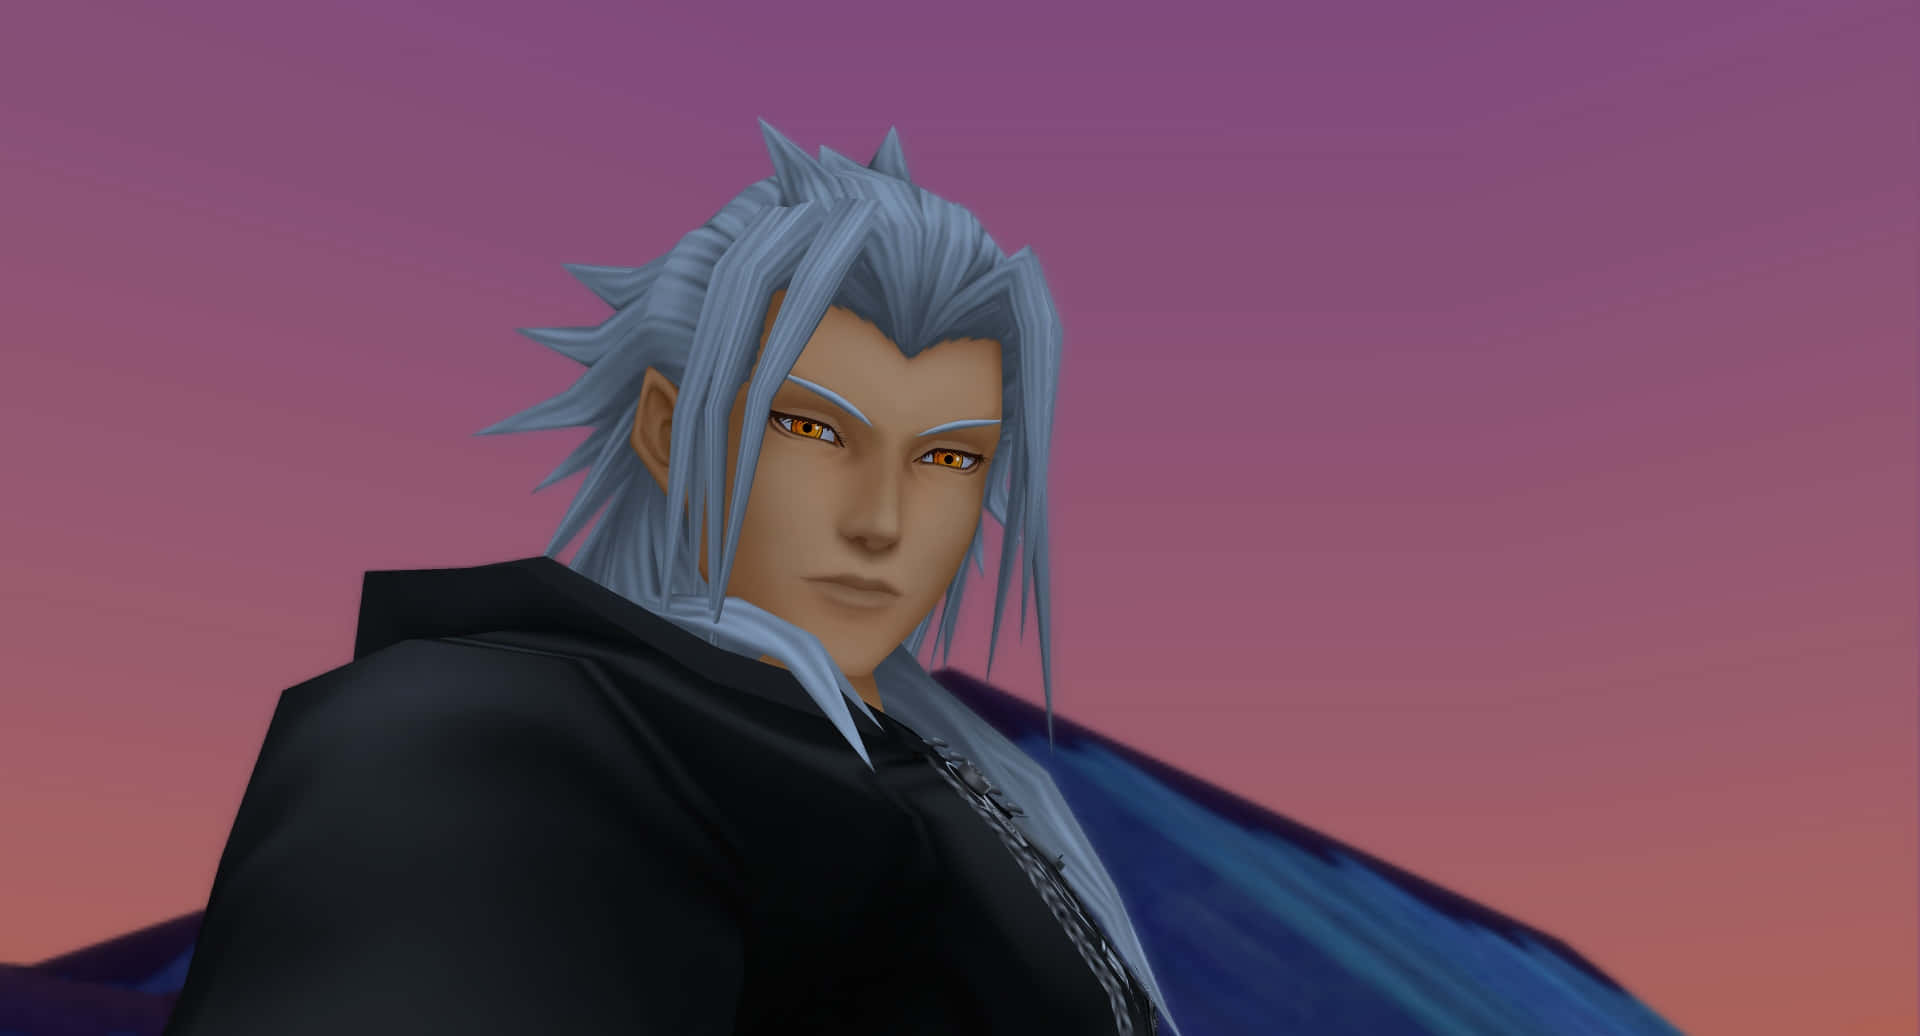 Xemnas, the powerful antagonist from Kingdom Hearts, ready for battle. Wallpaper